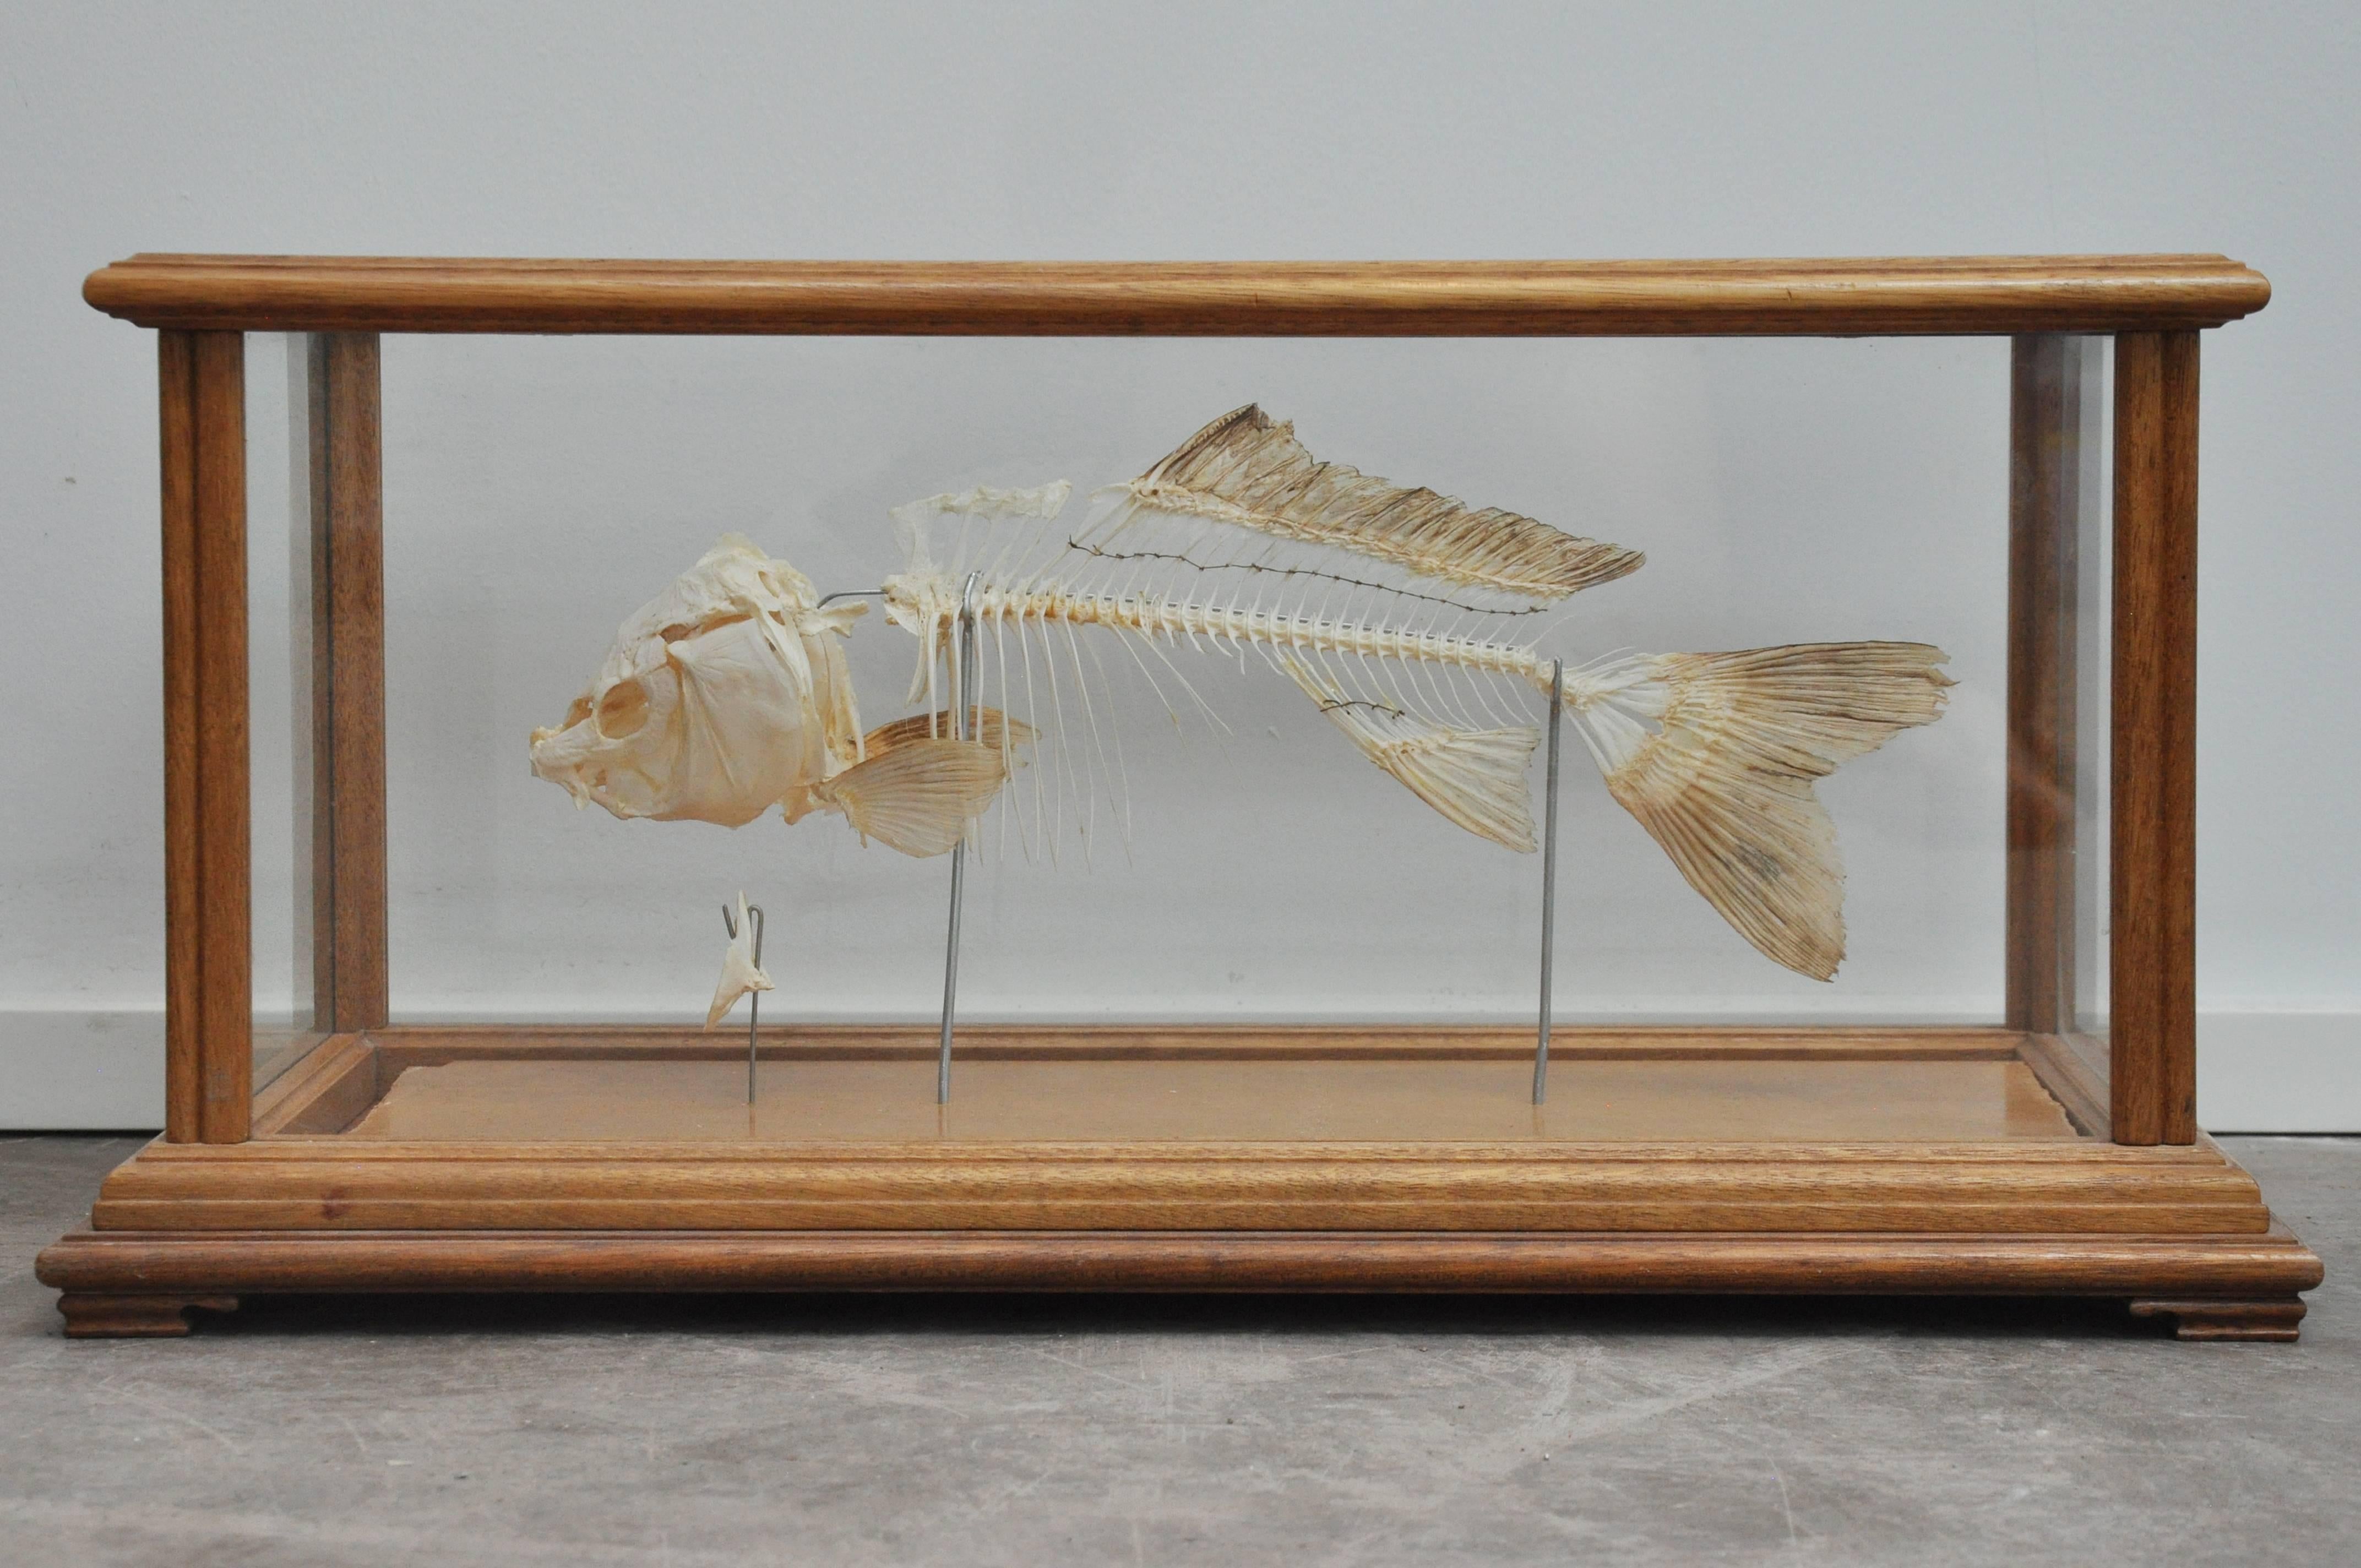 Wood Early 20th Century Antique Fish Skeleton in Glass Display Case